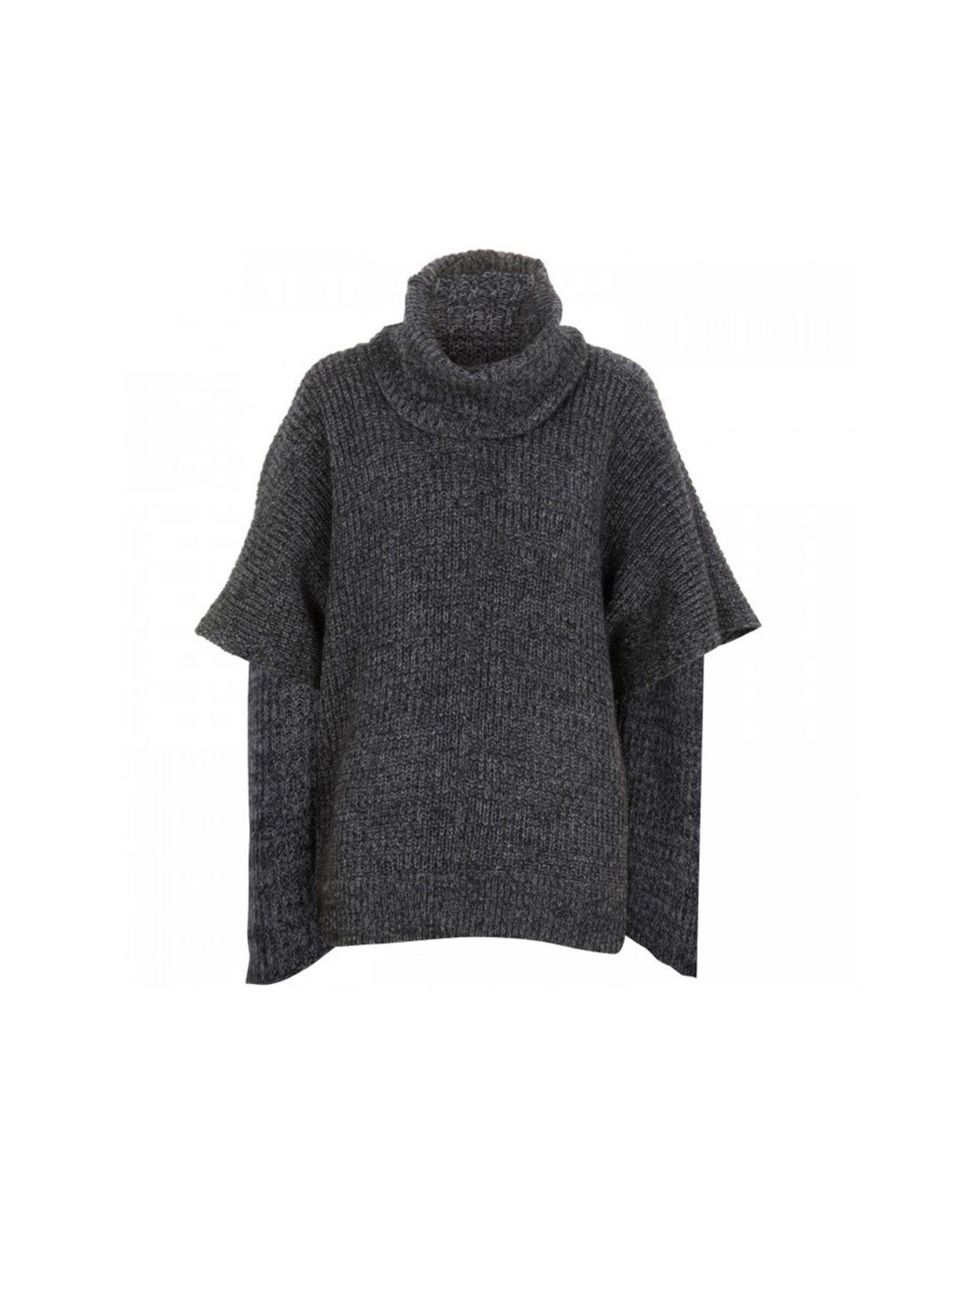 <p>Marc by Marc Jacobs 'Isadore' knitted poncho, £240, at <a href="http://www.harveynichols.com/womens/categories-1/designer-knitwear/jumpers/s395064-isadore-knitted-poncho.html?colour=GREY">Harvey Nichols</a></p>